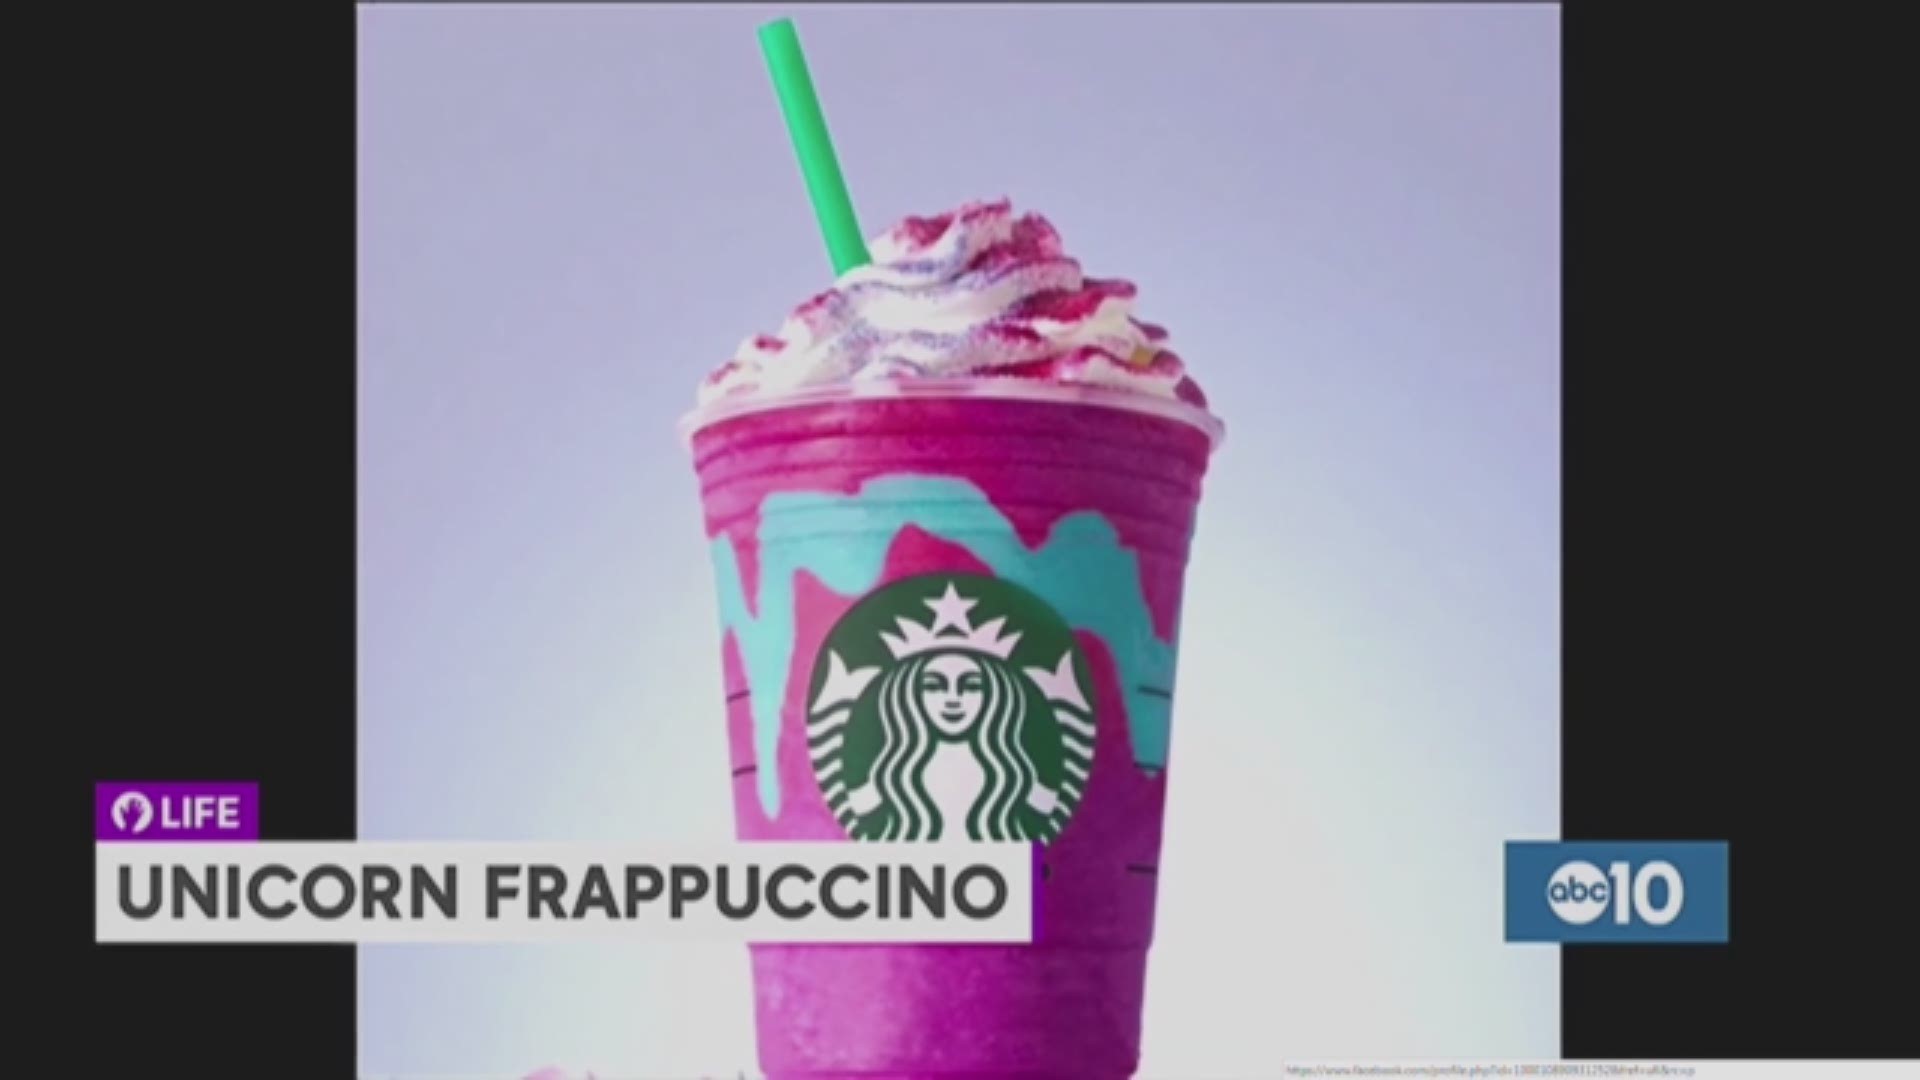 The Starbucks Unicorn Frappuccino has arrived and Dena, Megan and Kennelia have to try it. (April 19, 2017)